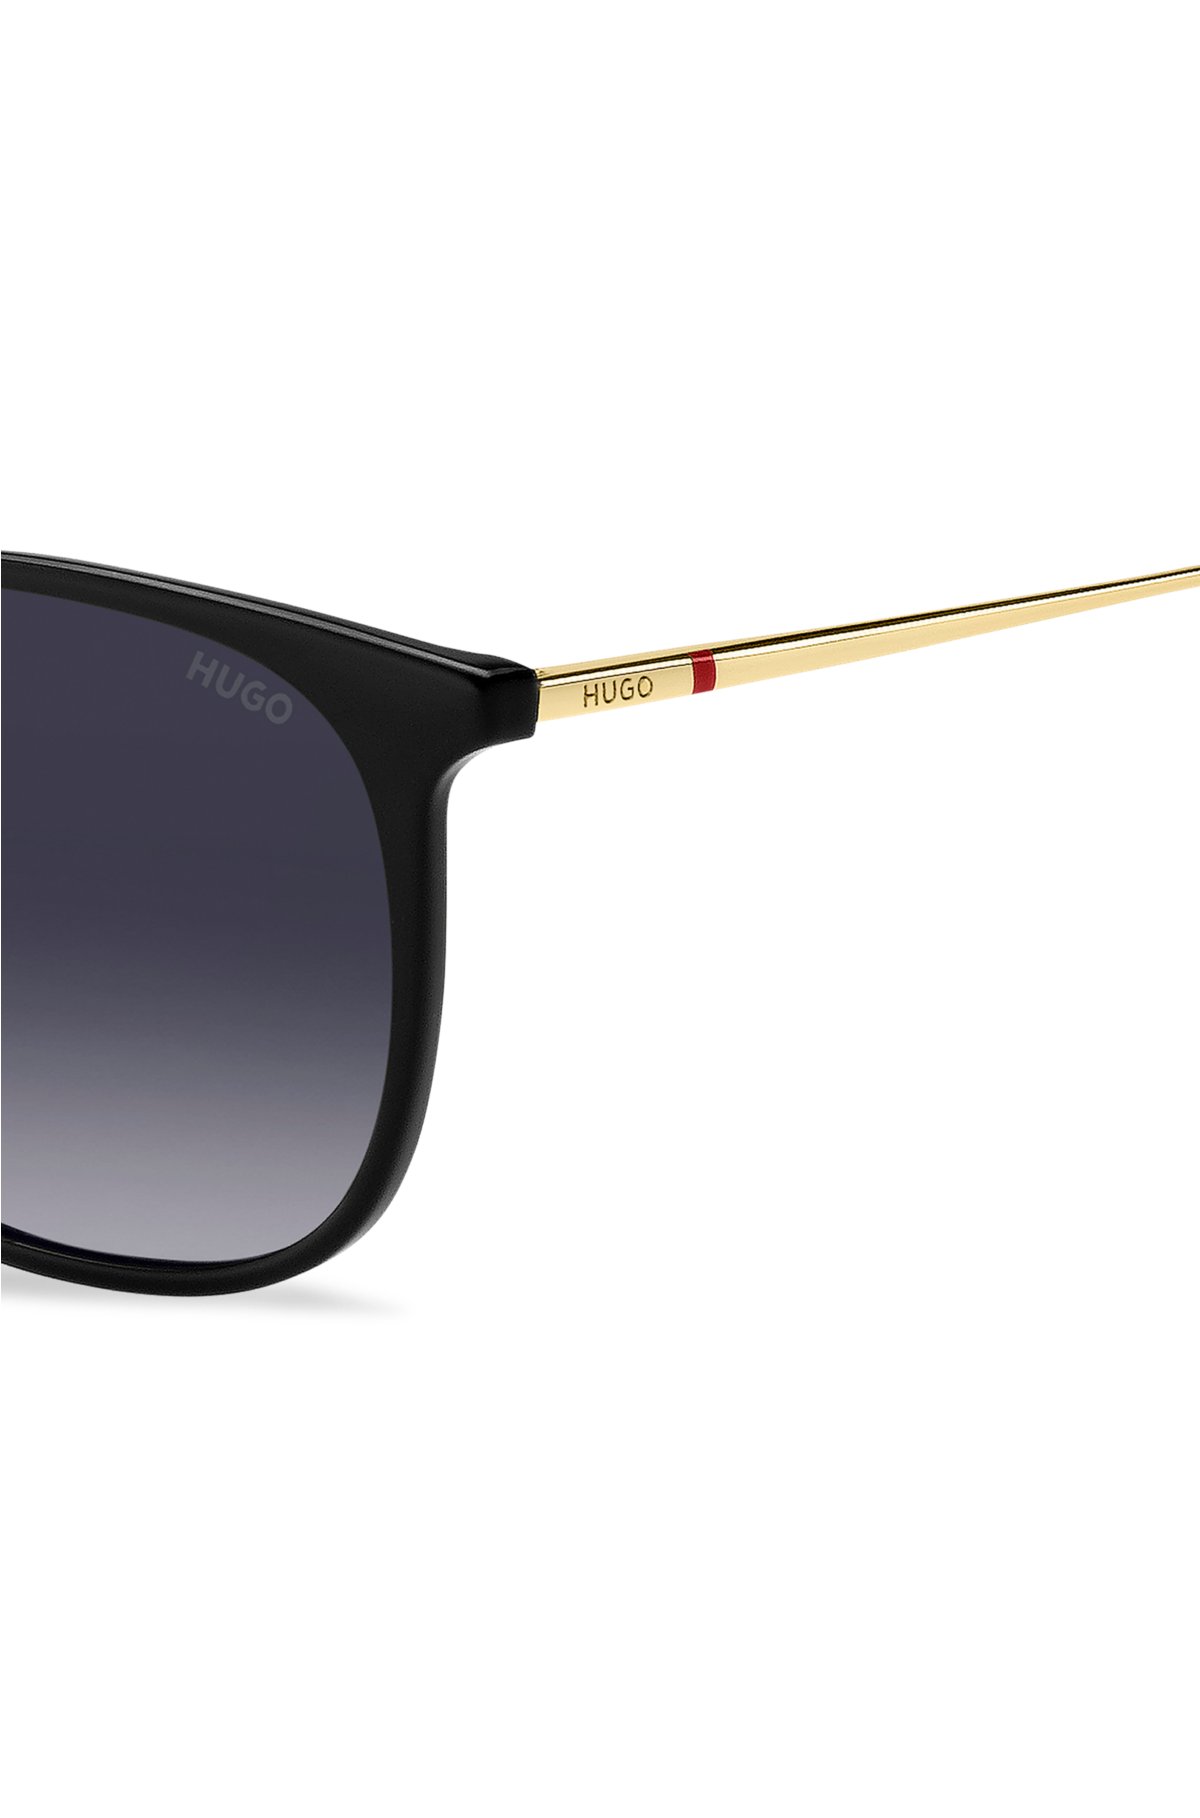 Black sunglasses with gold-tone temples, Black